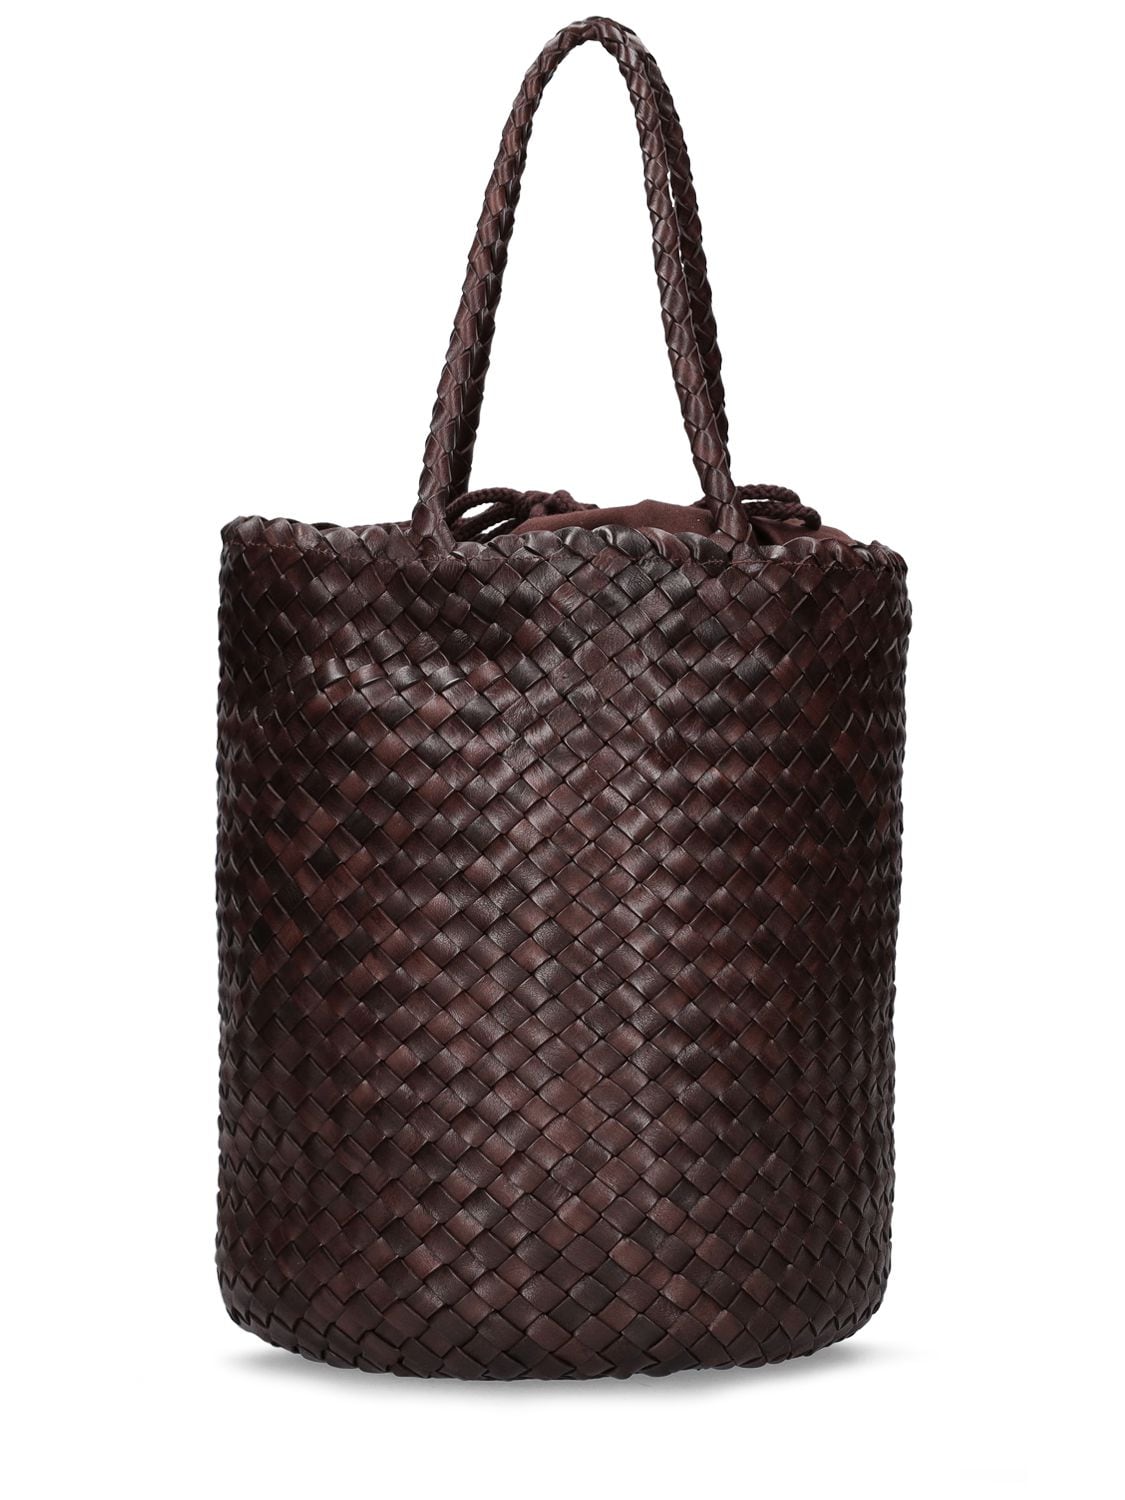 DRAGON DIFFUSION Hand Braided Leather Straps Basket Bag